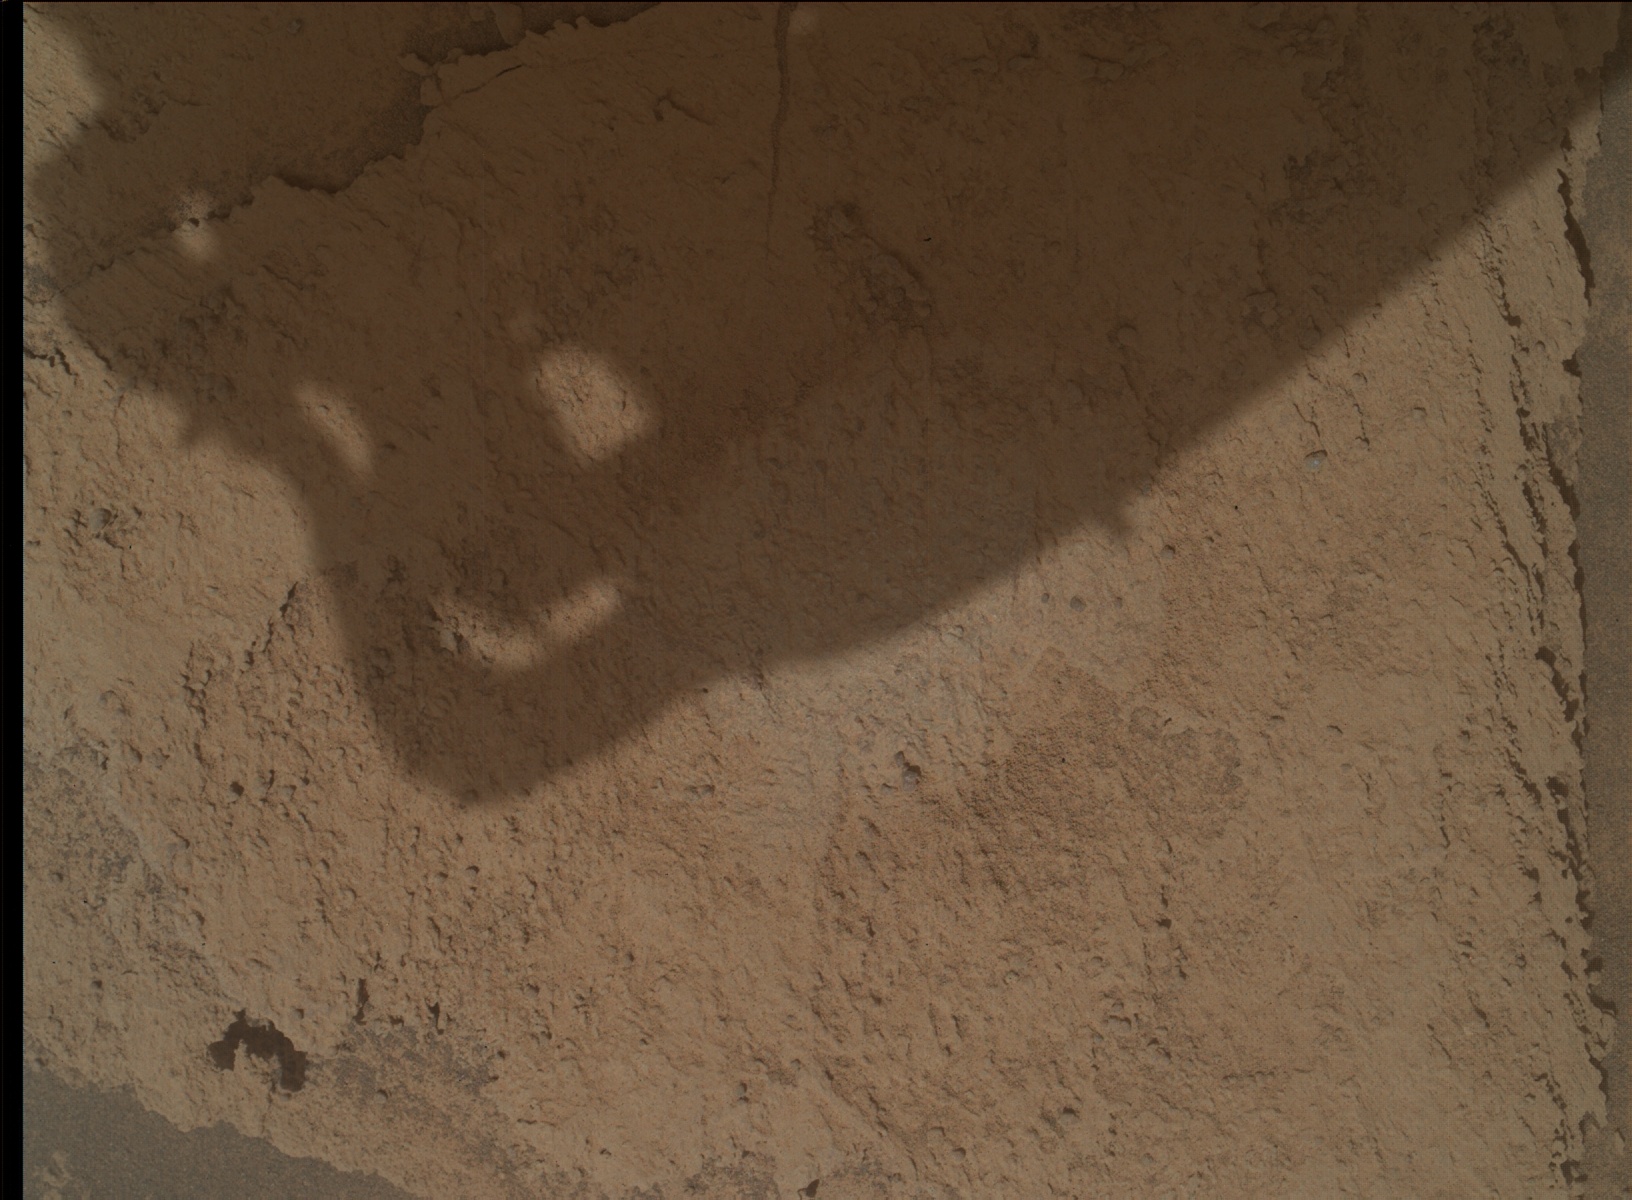 Nasa's Mars rover Curiosity acquired this image using its Mars Hand Lens Imager (MAHLI) on Sol 3560